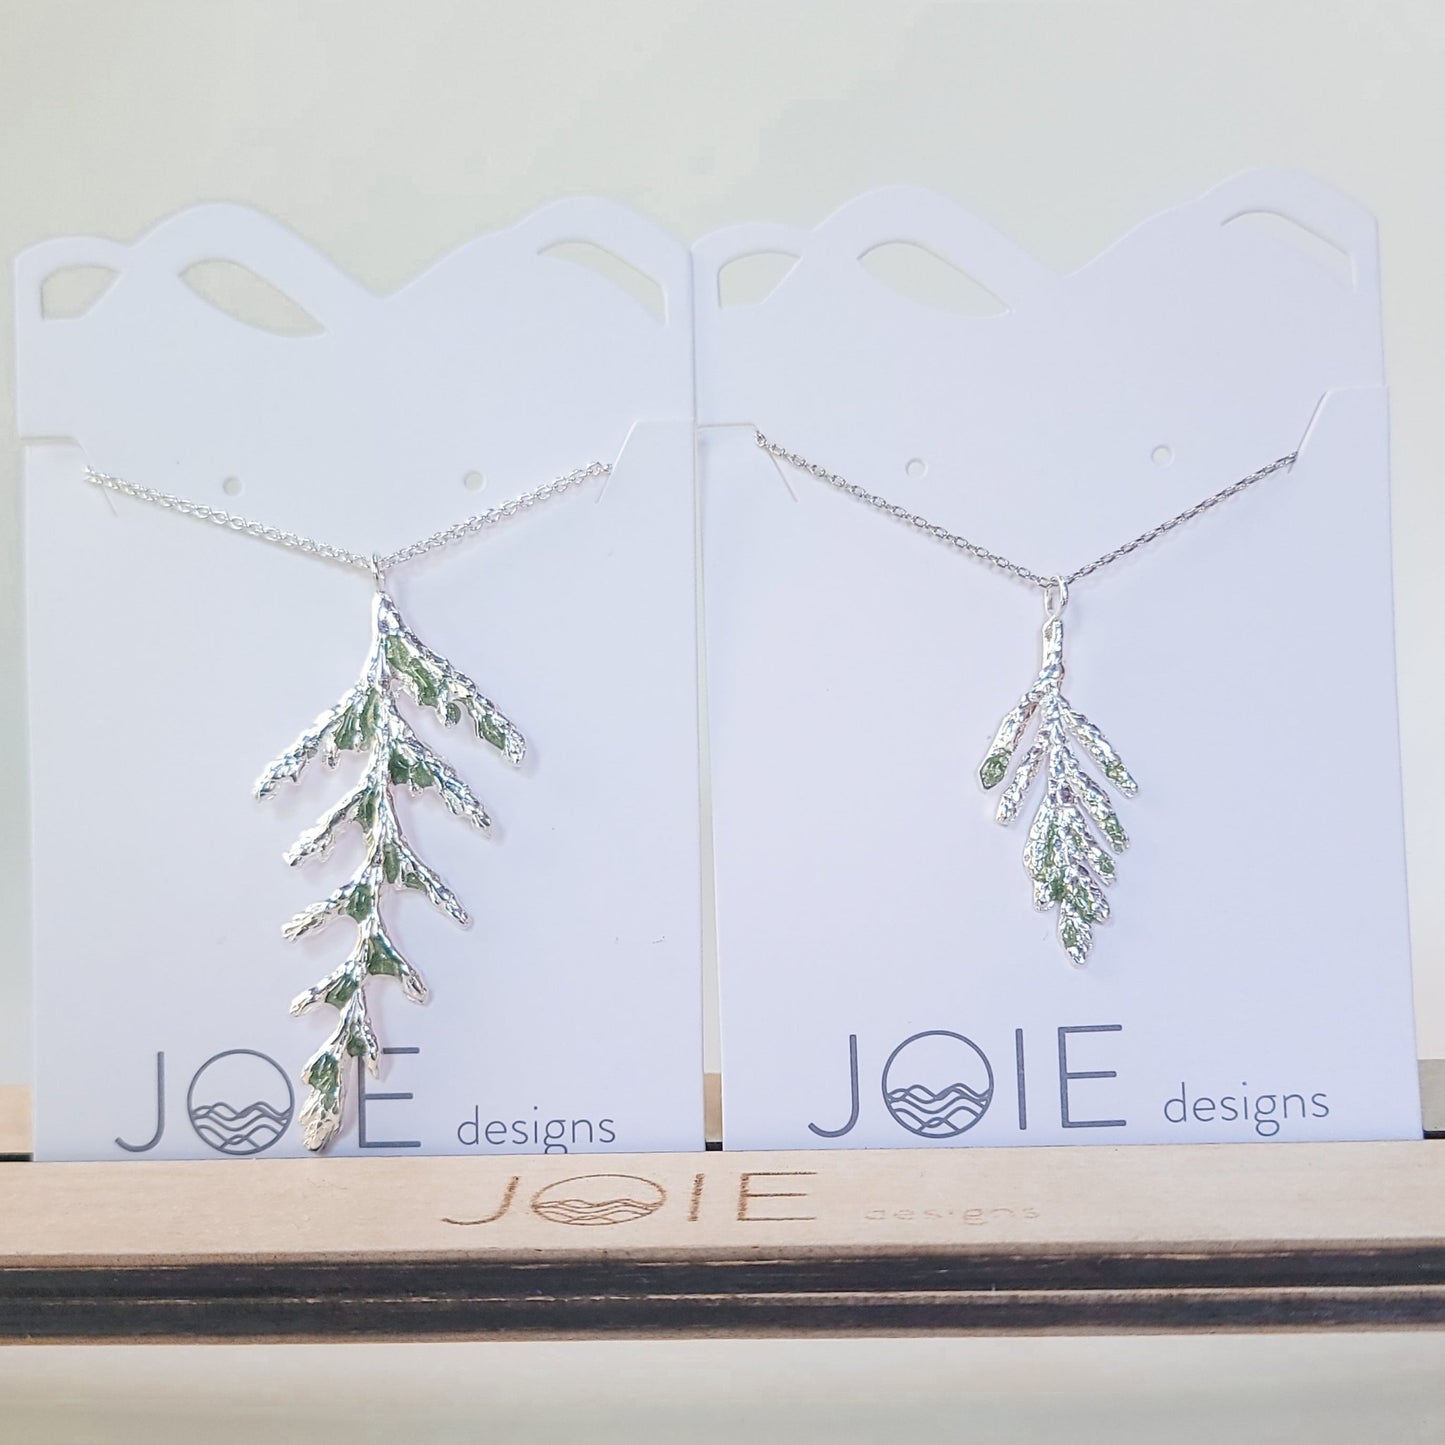 Embellished Silver Thuja and Petite Arborvitae Cedar Leaf Necklaces with green resin detailing